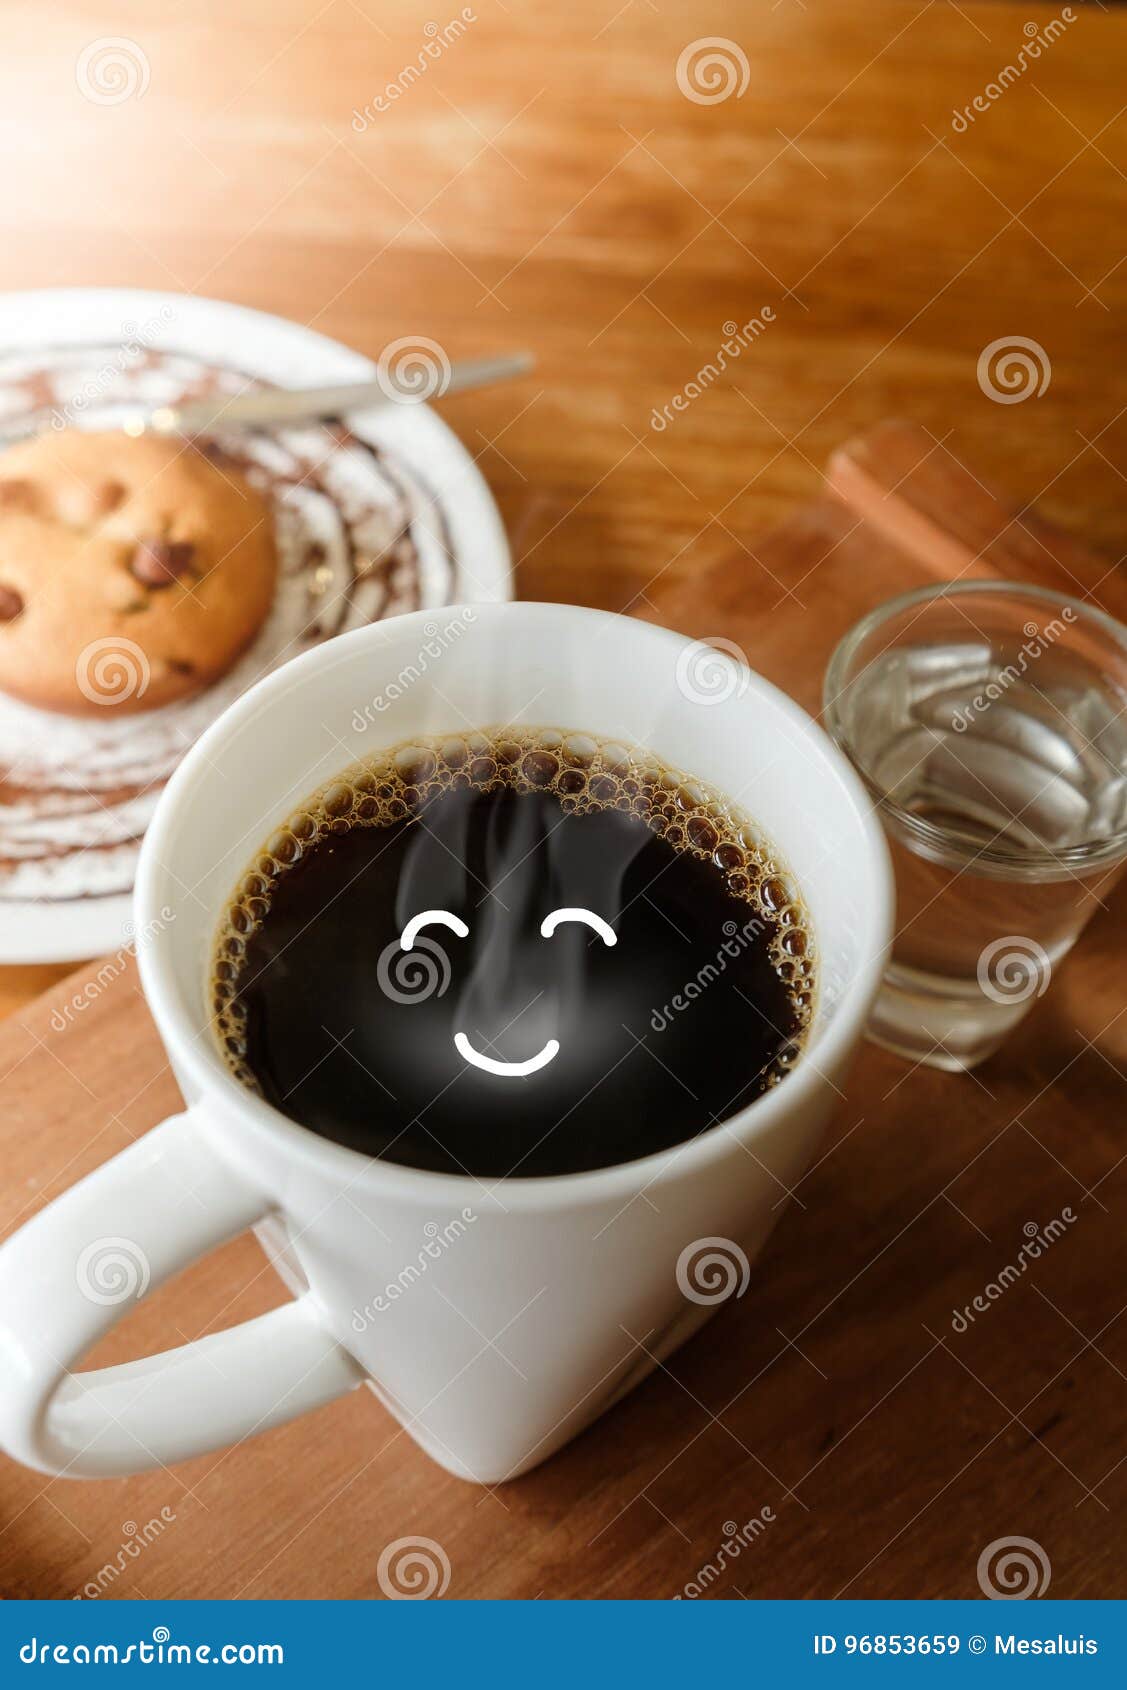 Good Morning Smile Coffee with Cookie and Water Stock Image ...